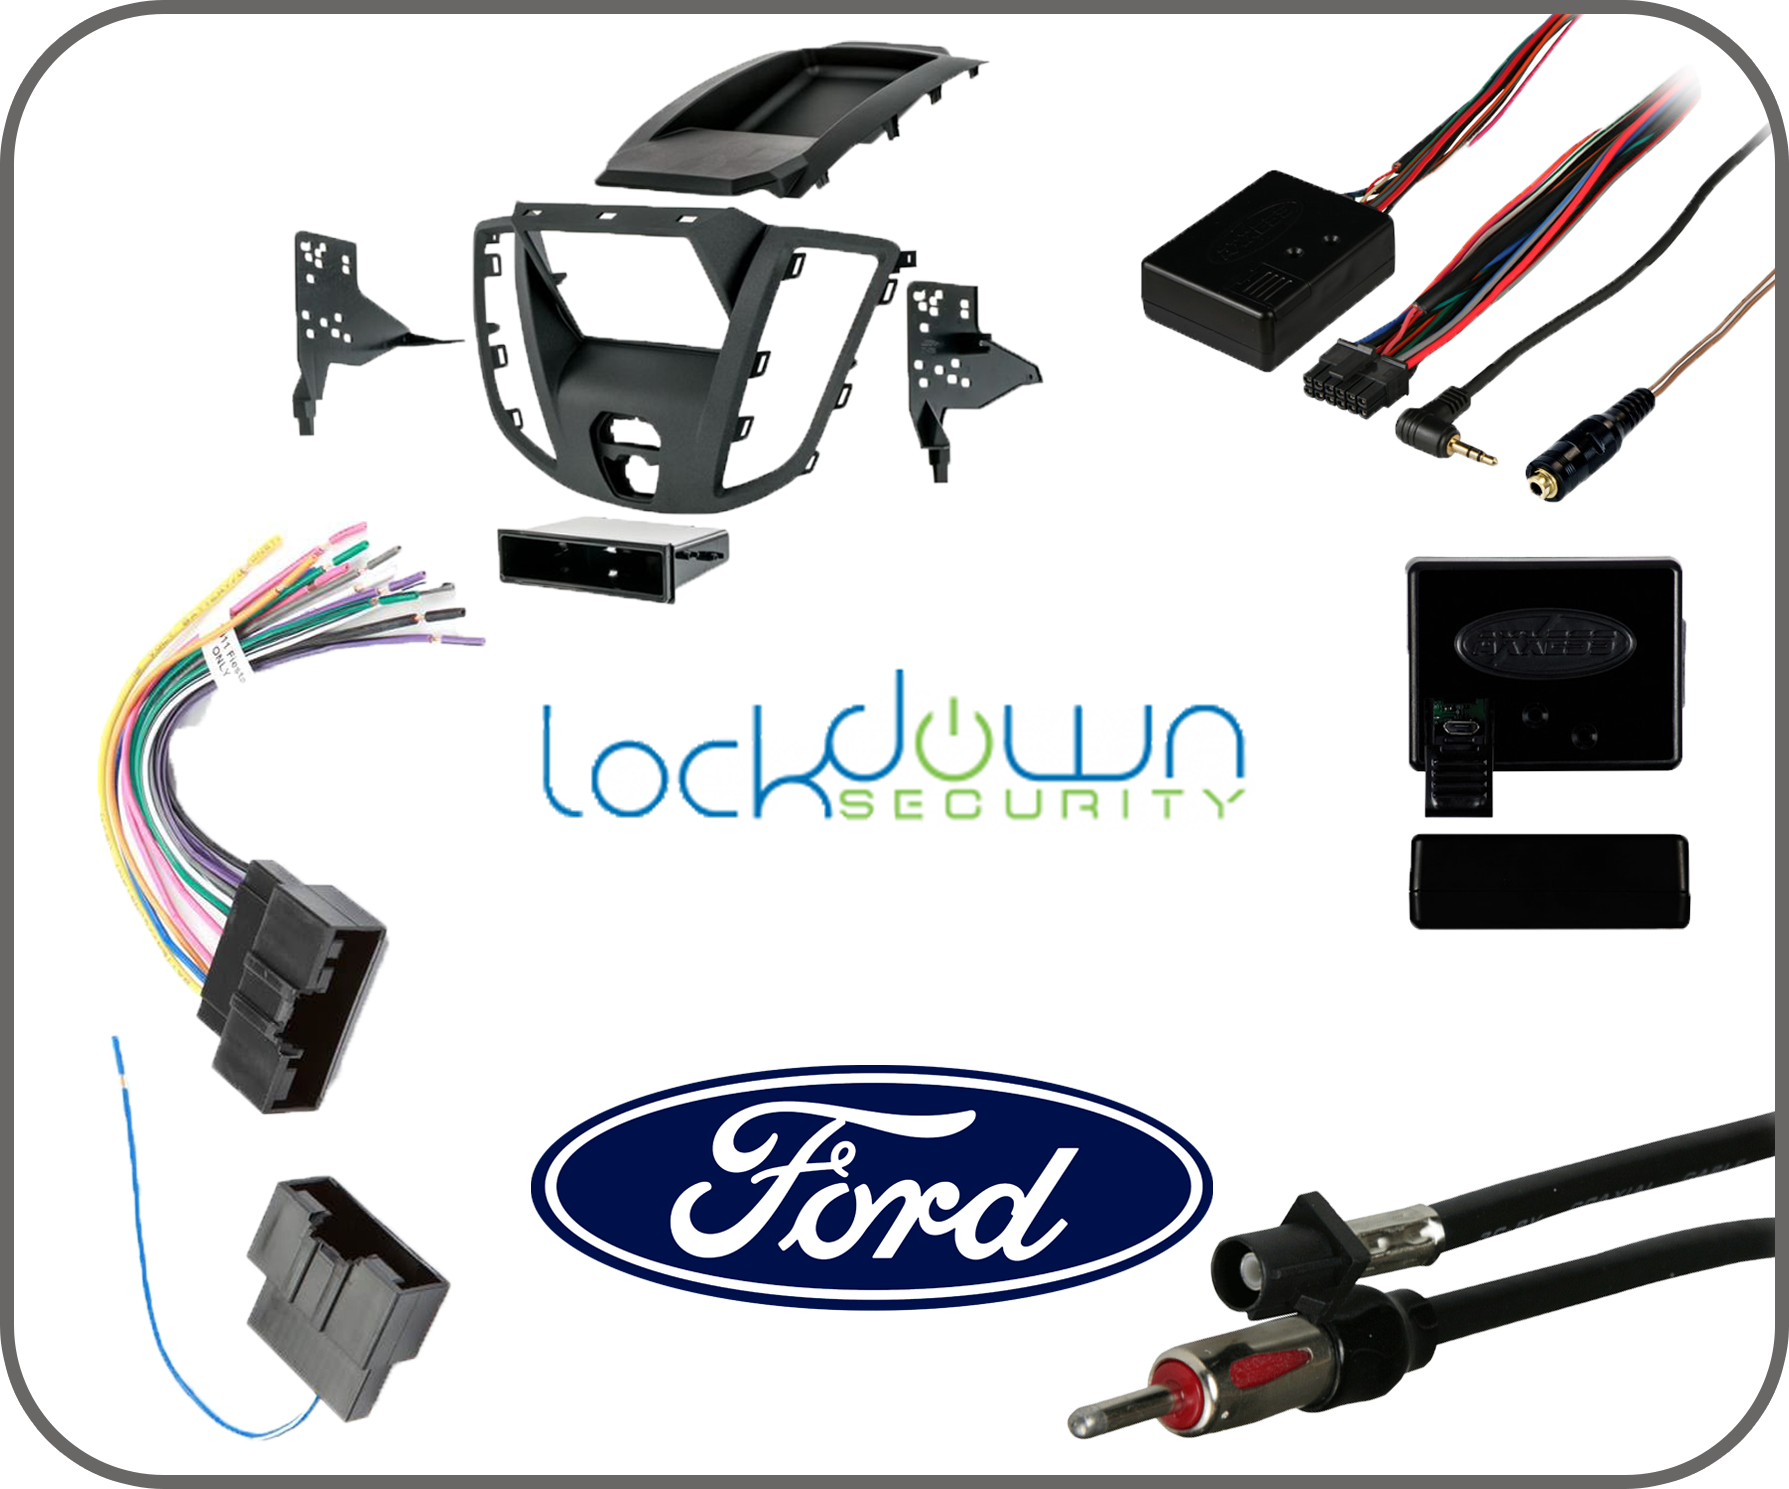 Ford Transit 2015-2019 Radio Replacement Parts Bundle ⭕ Includes Metra 99-5832G Mount Kit, Metra 40-EU10 Antenna Adapter, Metra 70-5524 Wire Harness, Axxess AXSWC-1 Steering Wheel Control Interface